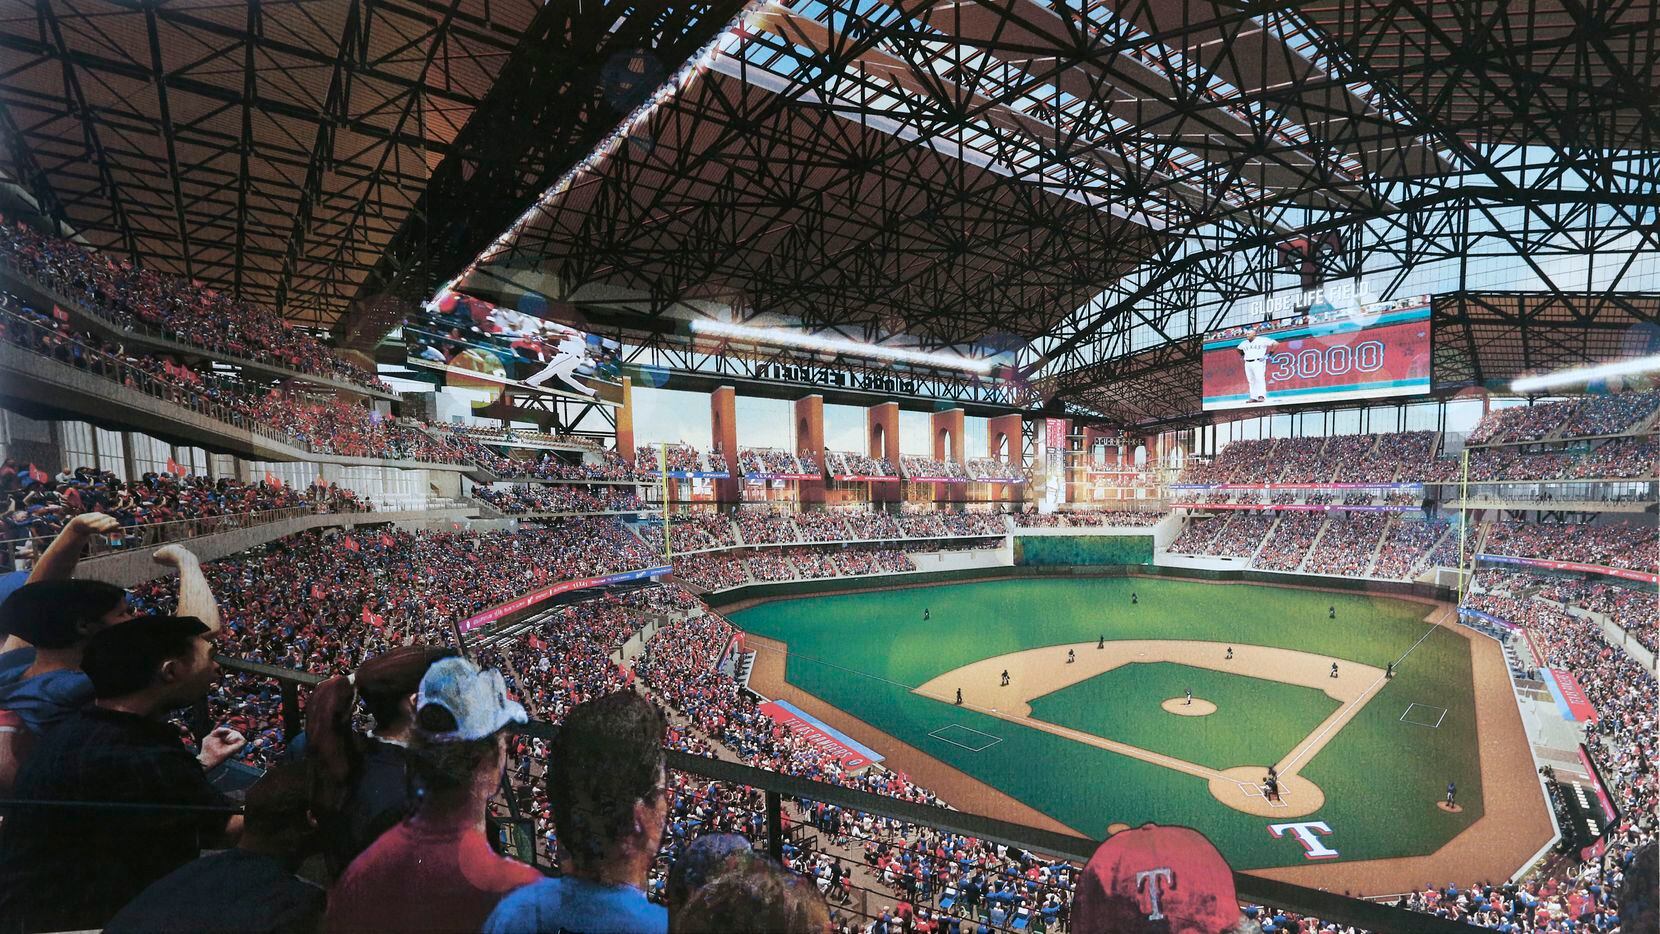 Globe Life Field - pictures, information and more of the future